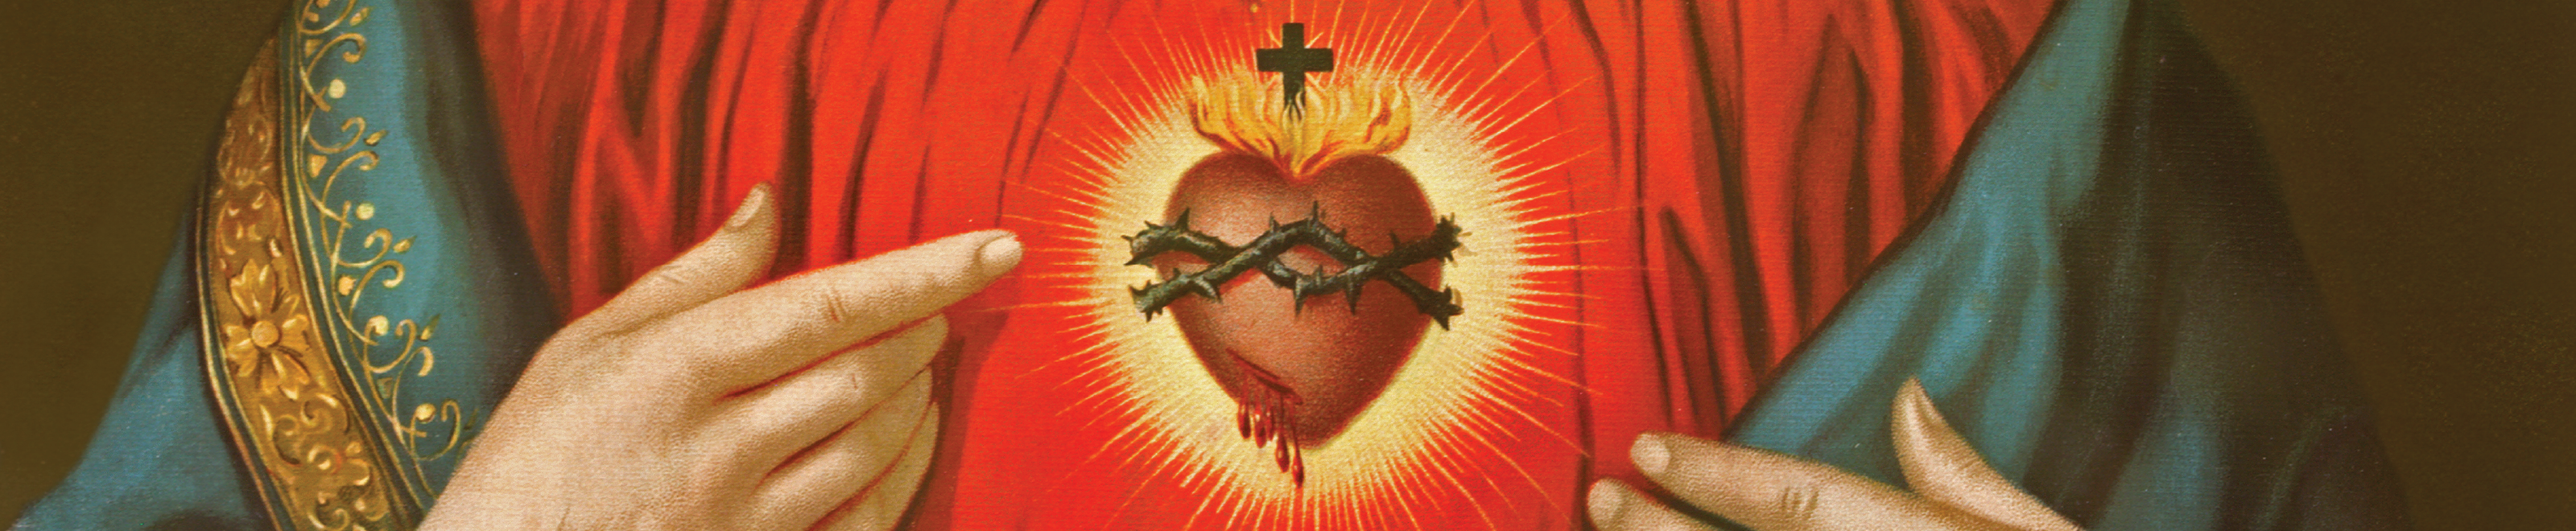 An illustration of the Sacred Heart of Jesus.